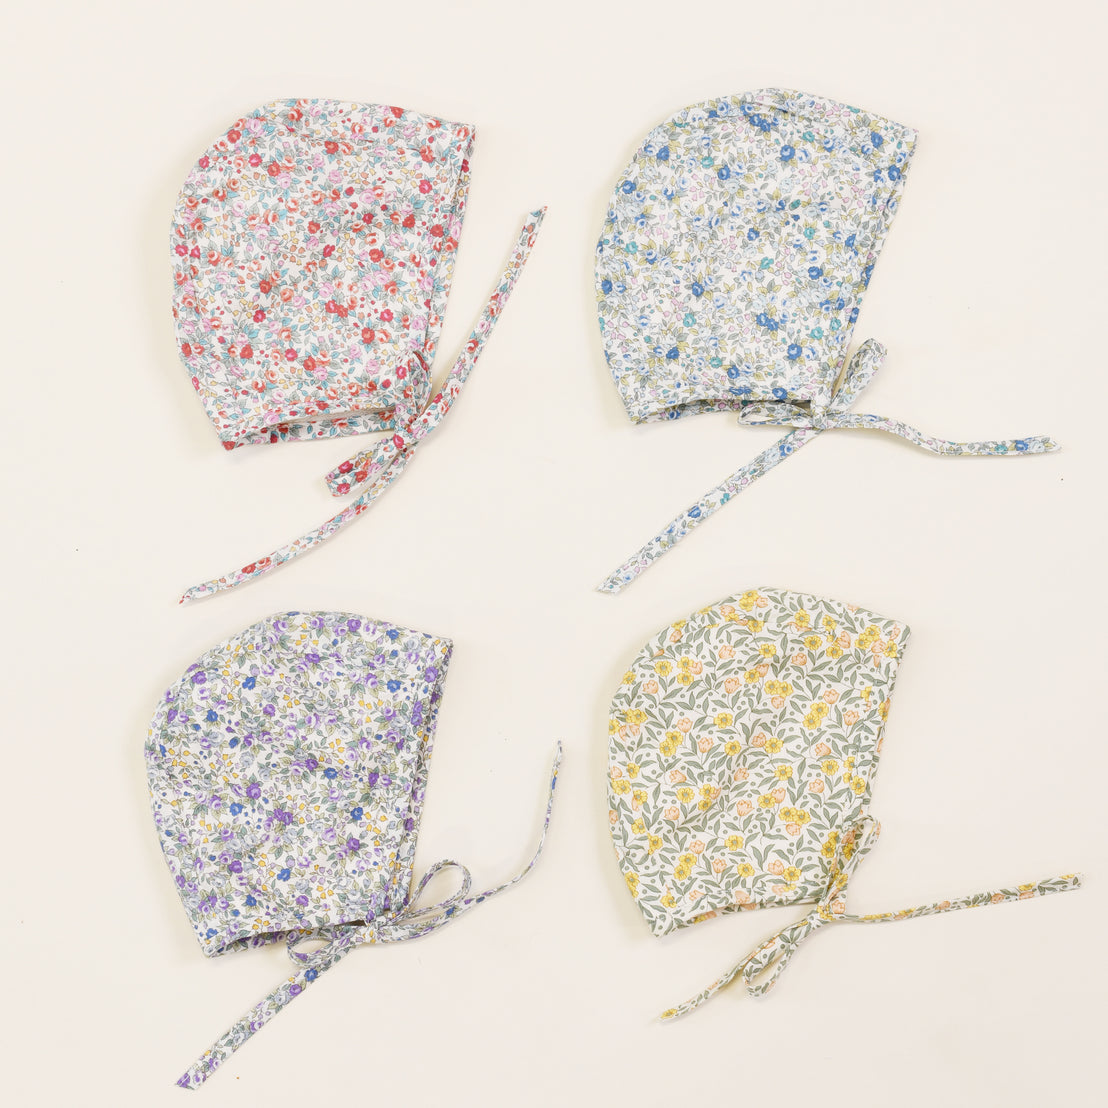 Four upscale, Petite Fleur Bonnets are arranged in a square pattern on a white background, each featuring fabric ties and a unique floral design.